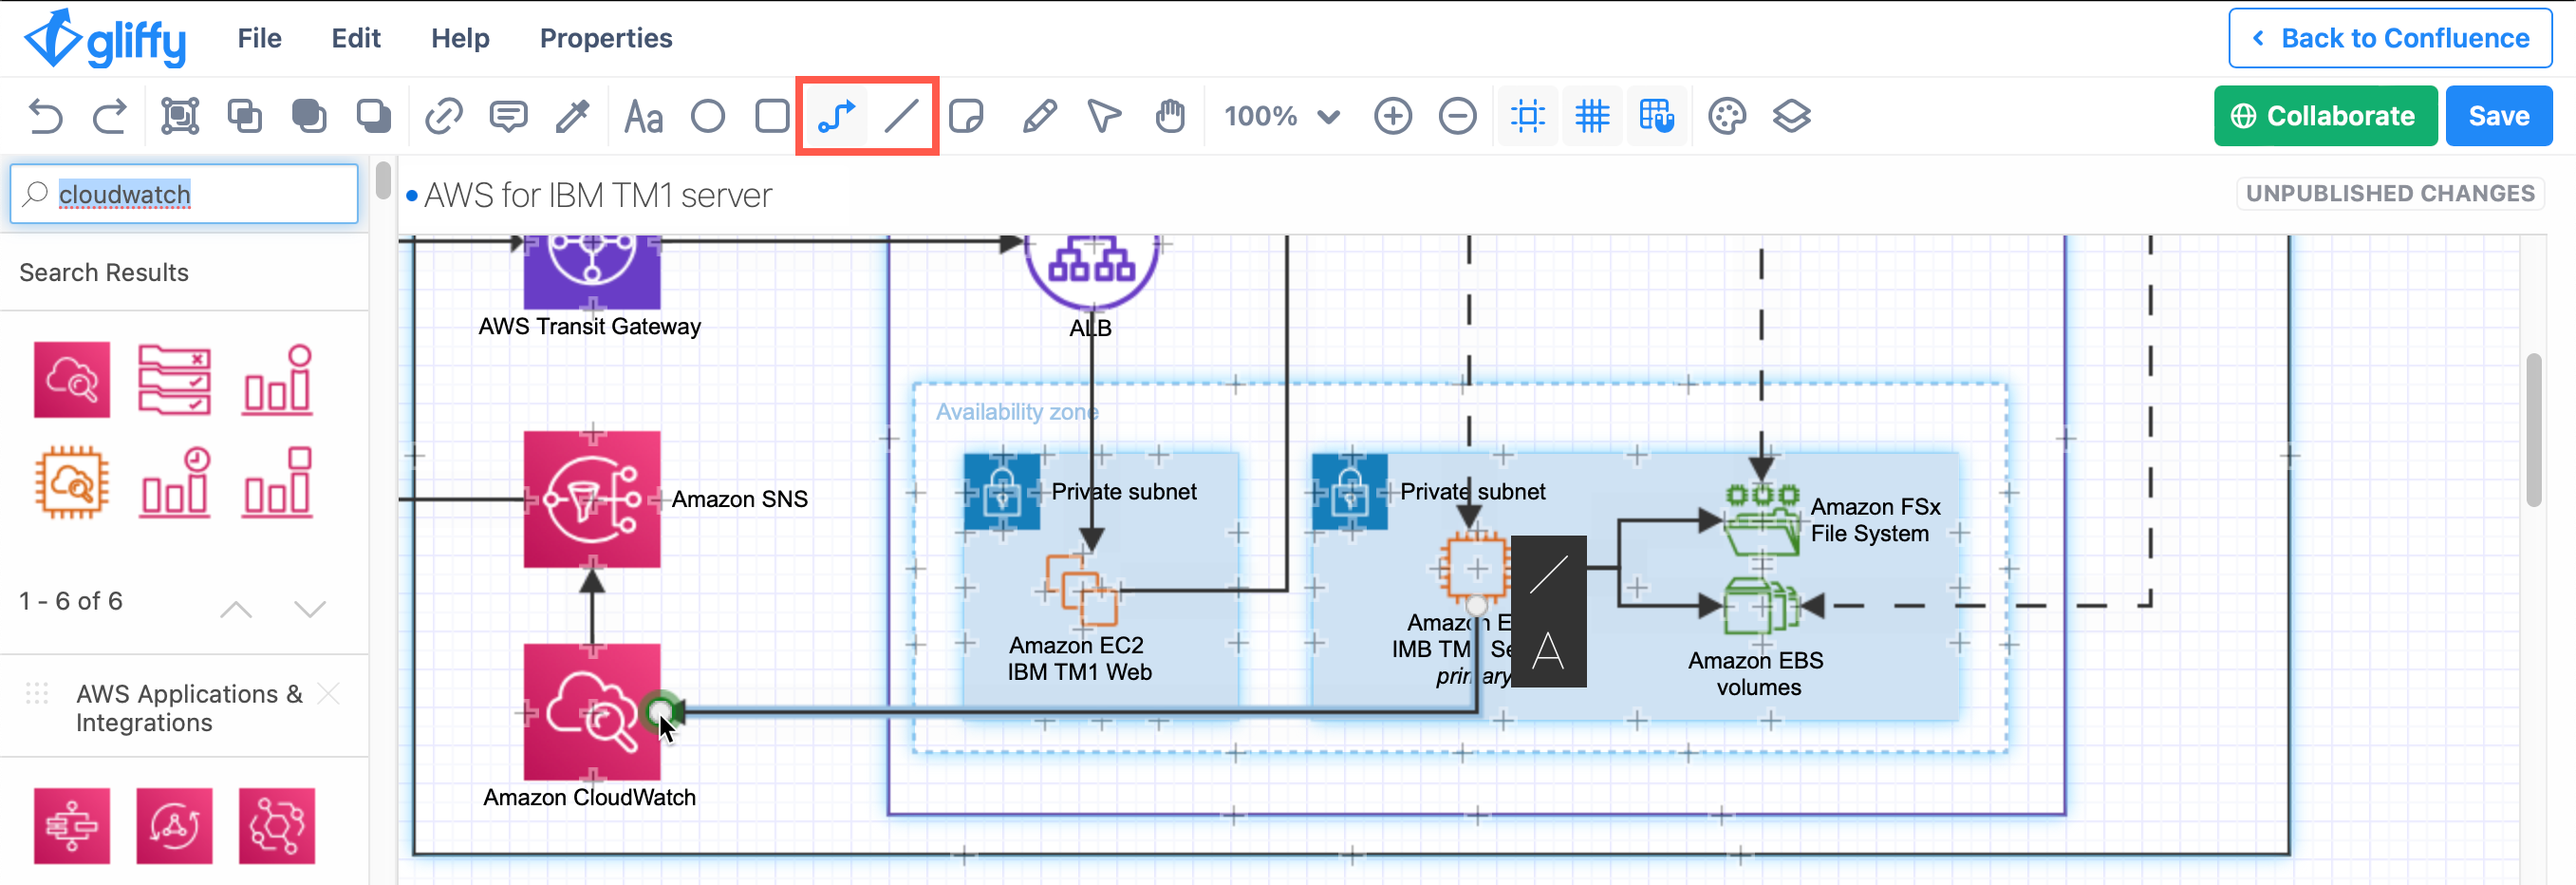 Activate the connector mode via the toolbar in Gliffy to see the fixed connection points on shapes and draw connectors